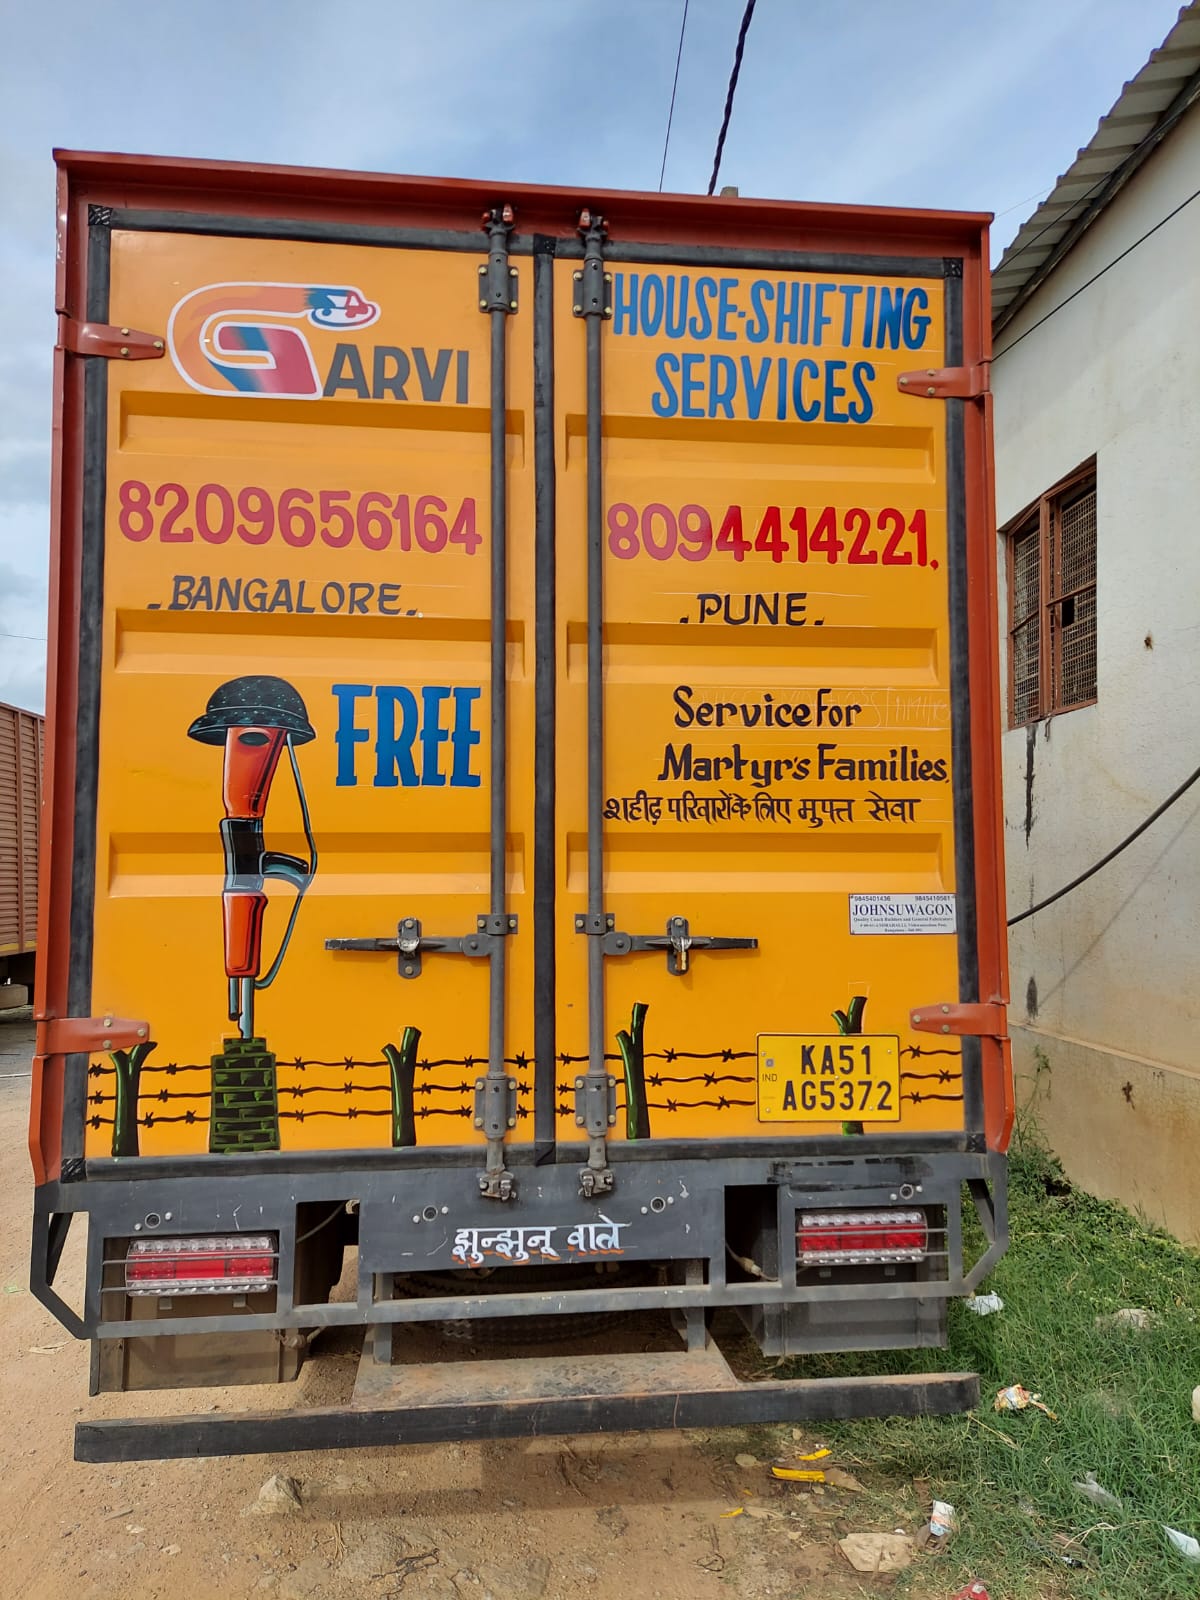 Garvi Packers and Movers